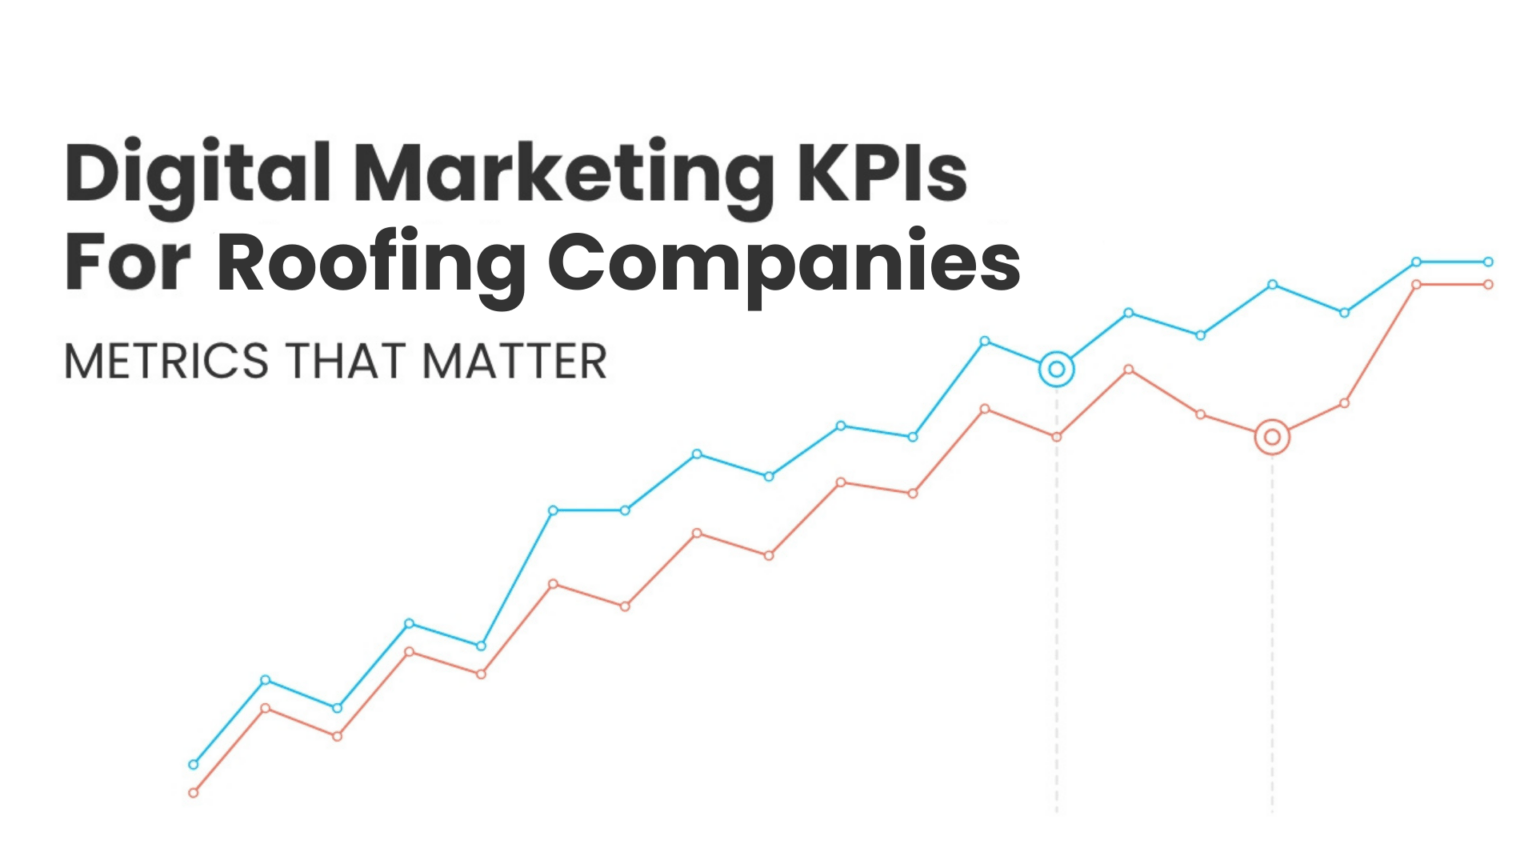 Digital Marketing KPIs for Roofing Companies